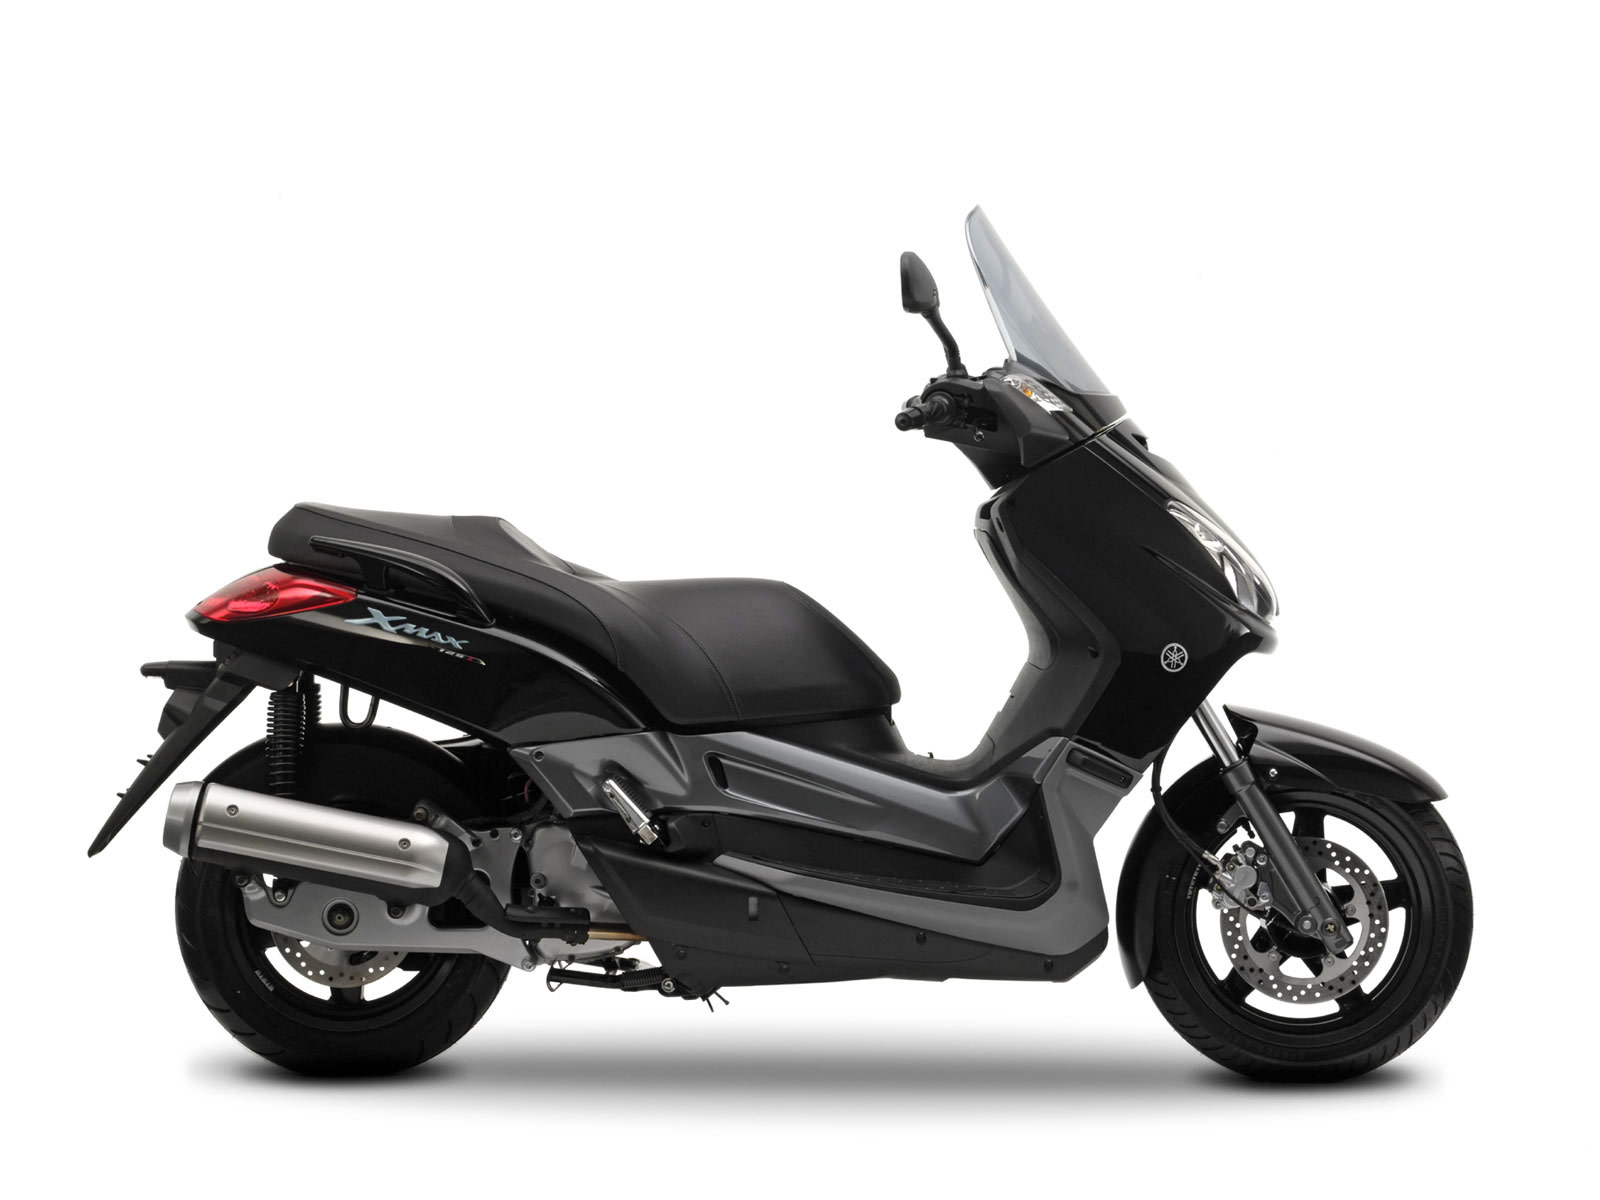 Scooter pictures. 2008 YAMAHA X-Max 125 specifications